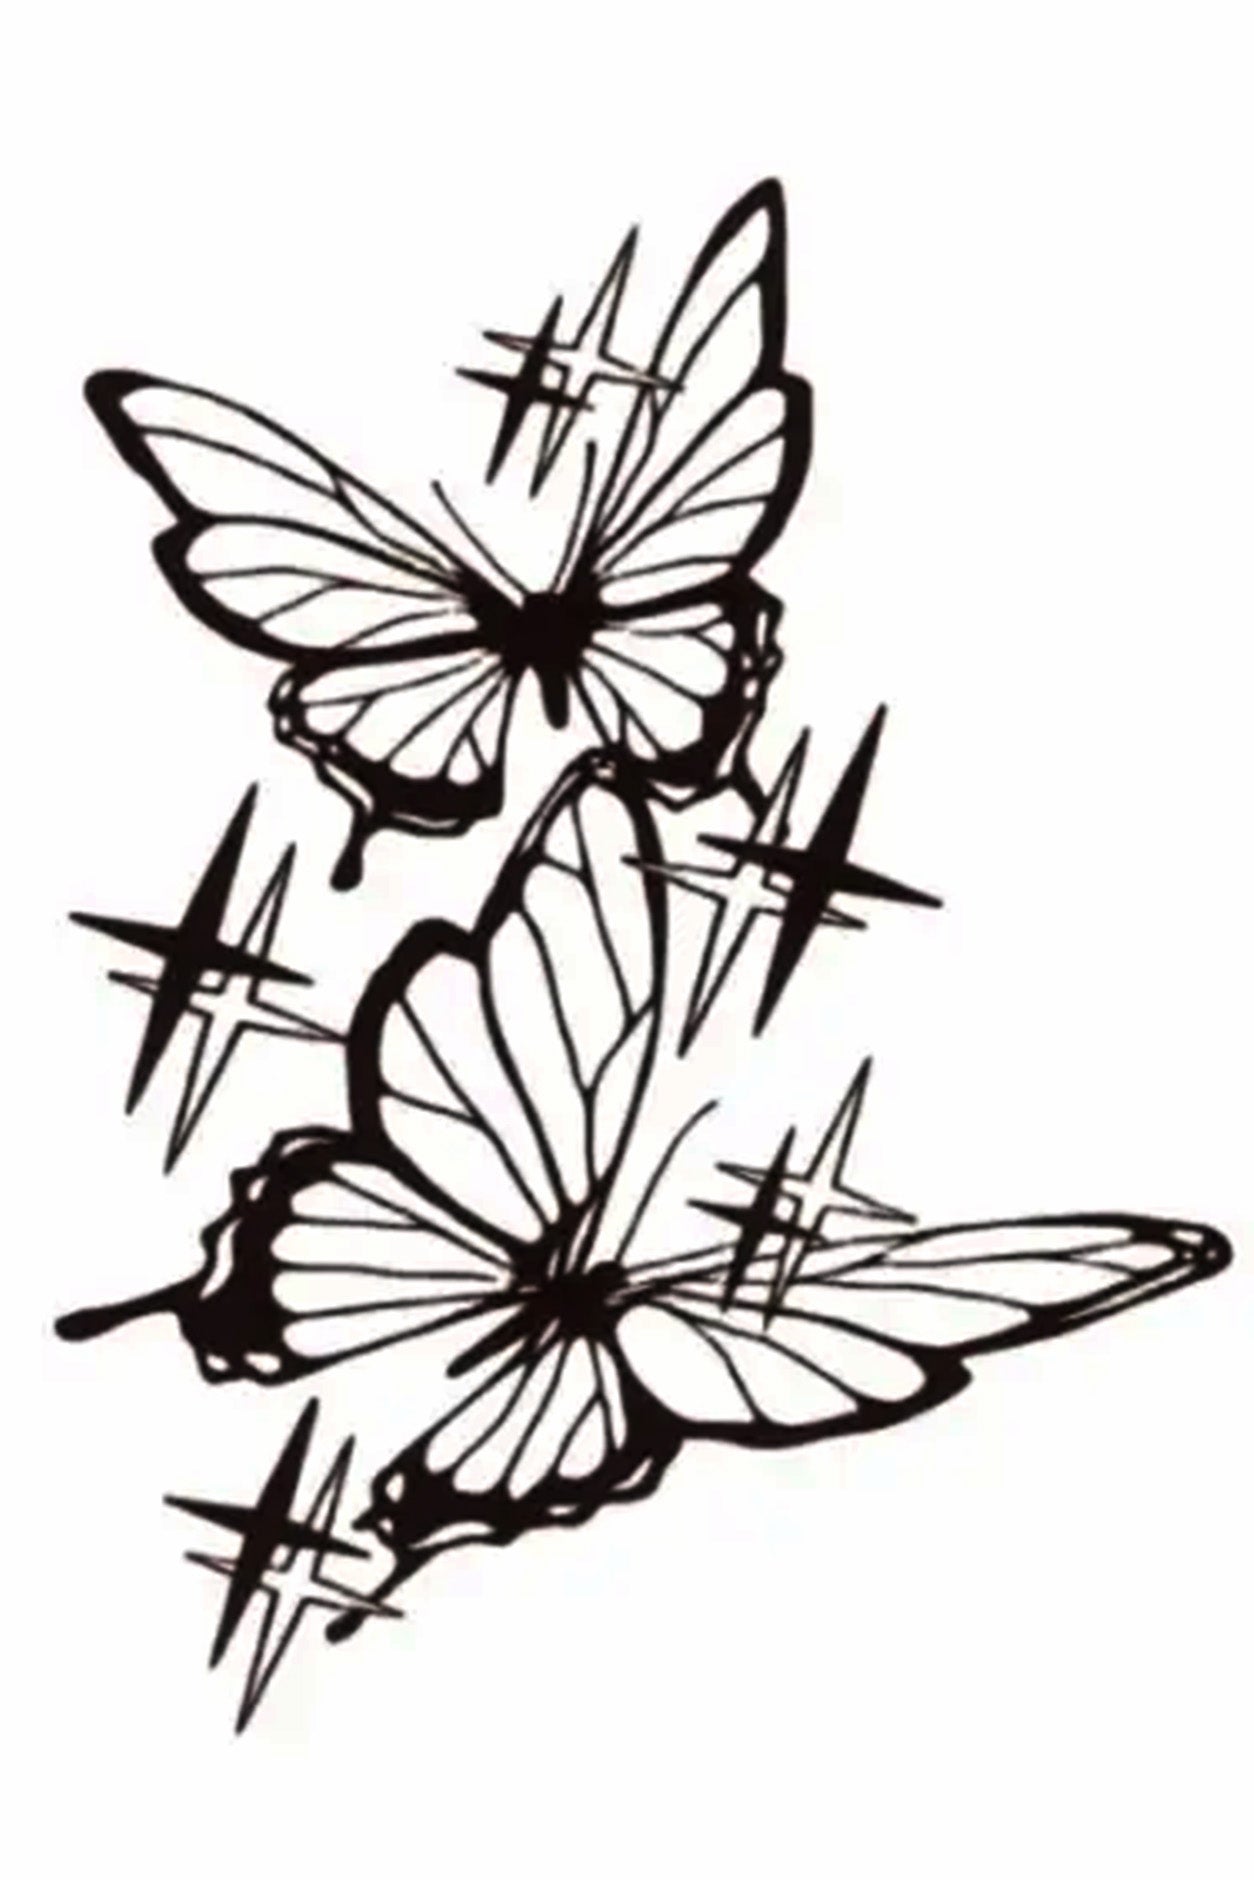 Two full-size butterflies in flight. As they fly, a sparkle of life and happiness is left behind. This tattoo is done in a traditional ink tattoo look, but we won't say that it is temporary!